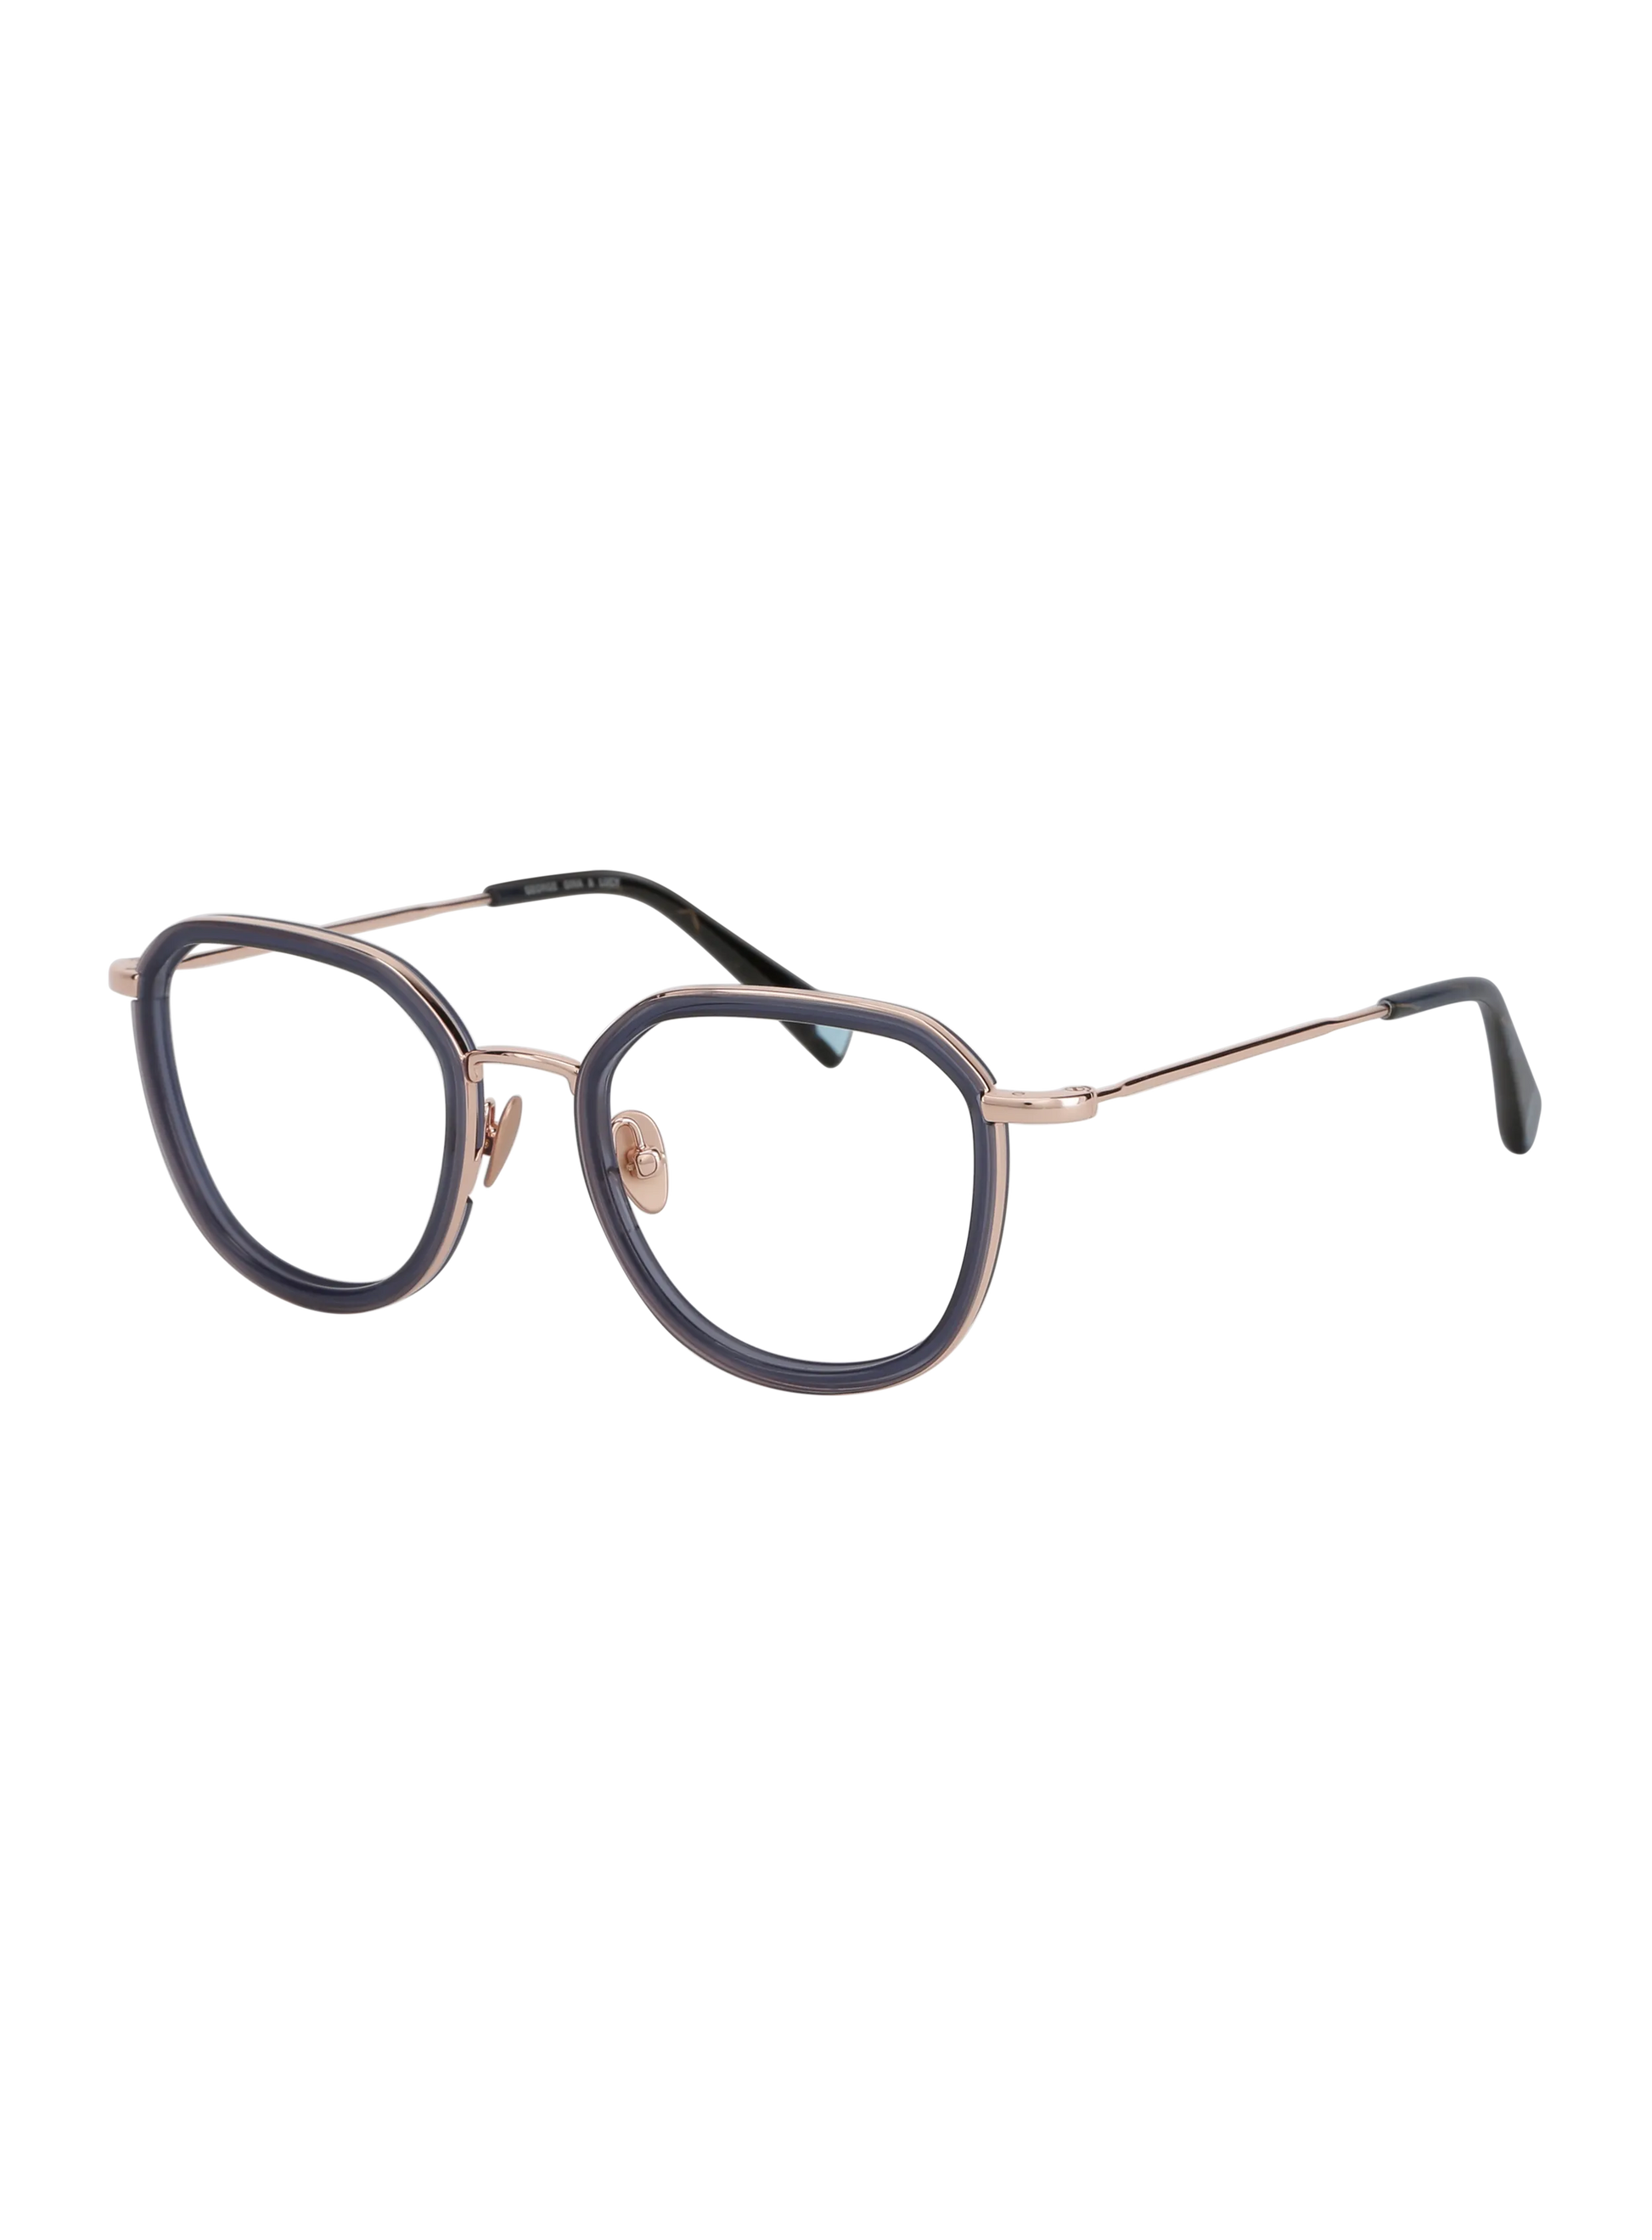 Farbe_clear blue rosegold 003